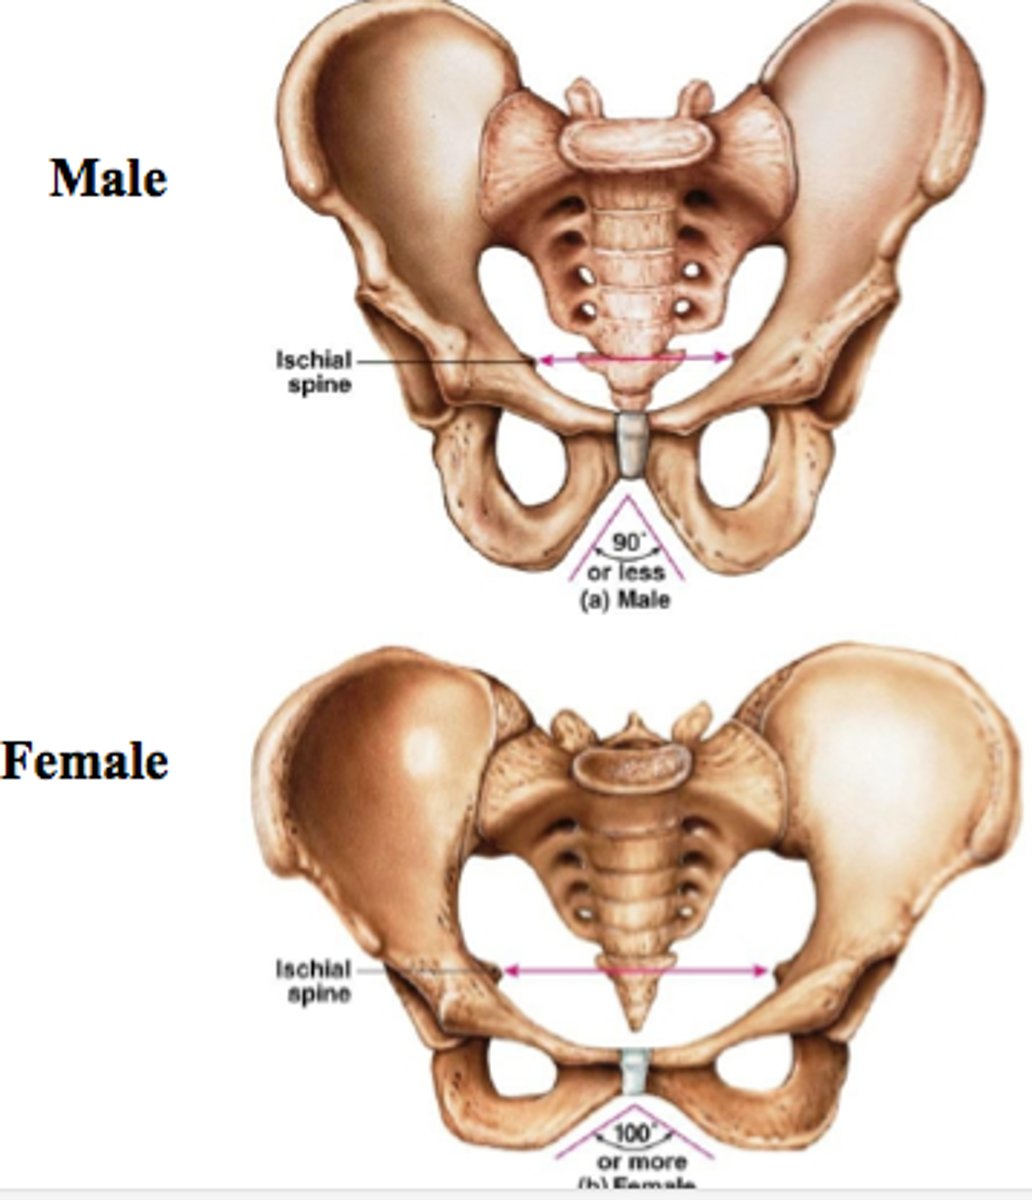 <p>Female: shallow, more broad with flaring, wider pubic arch</p><p>male: larger and heavier, deep, funnelshaped, narrow pubic arch</p>